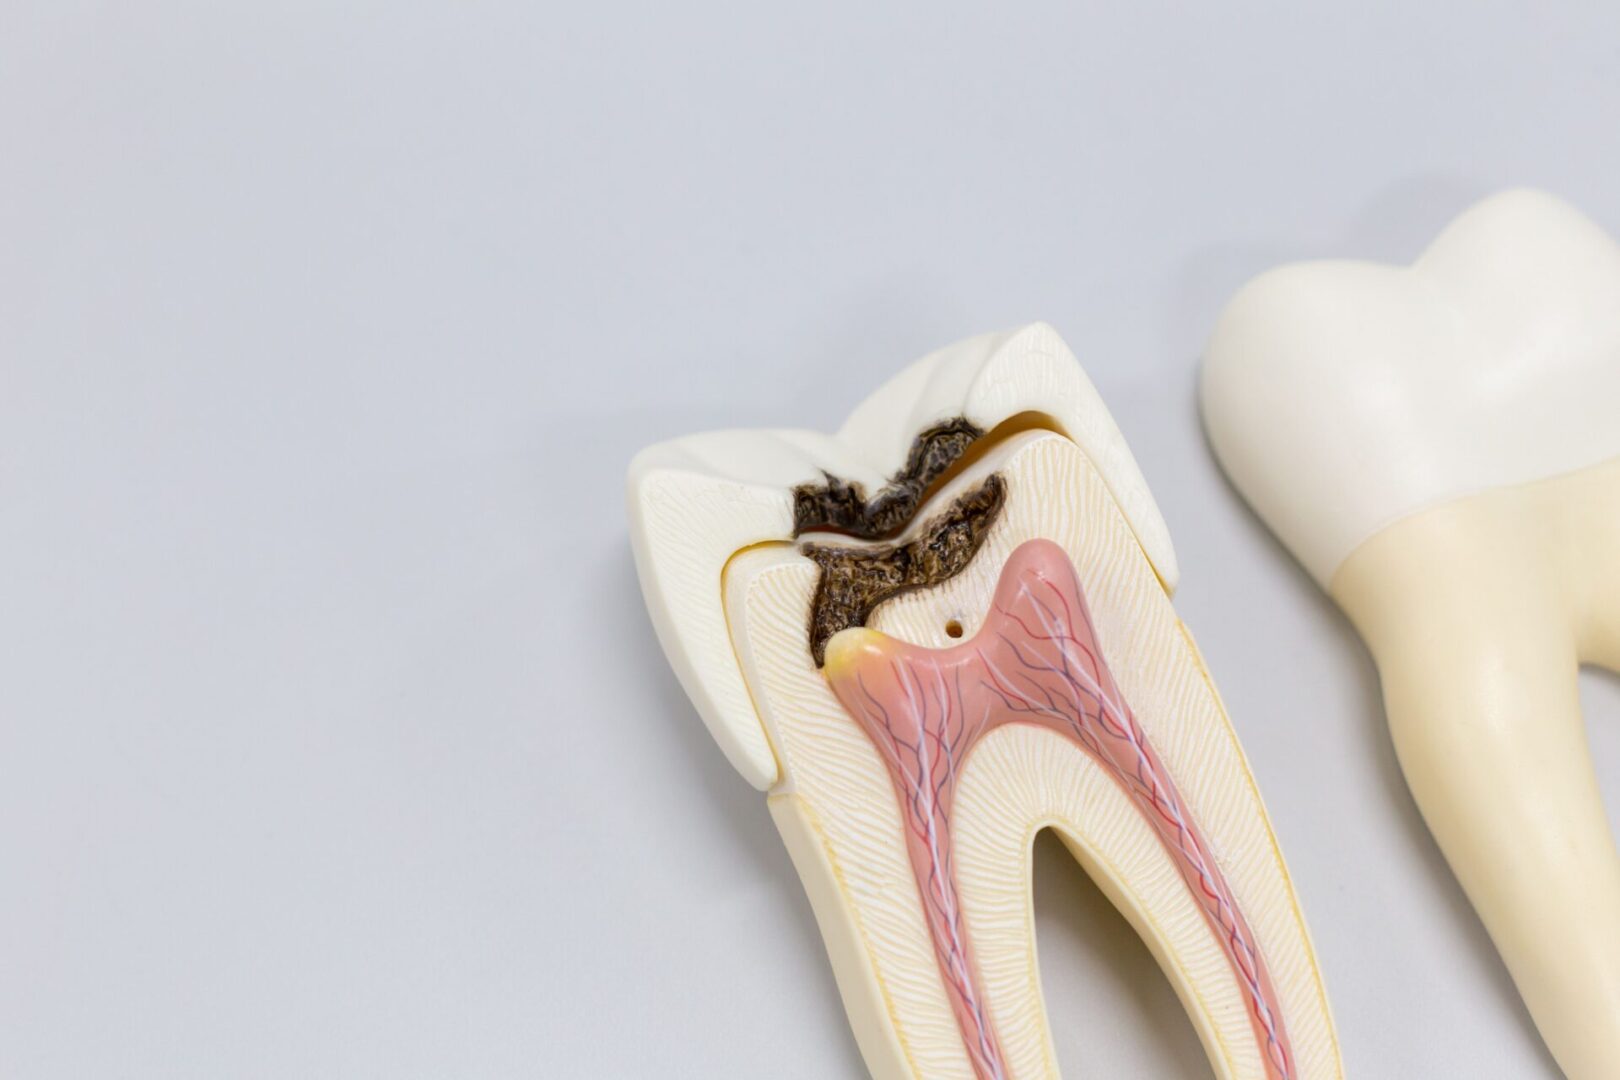 A tooth with root and caries on it